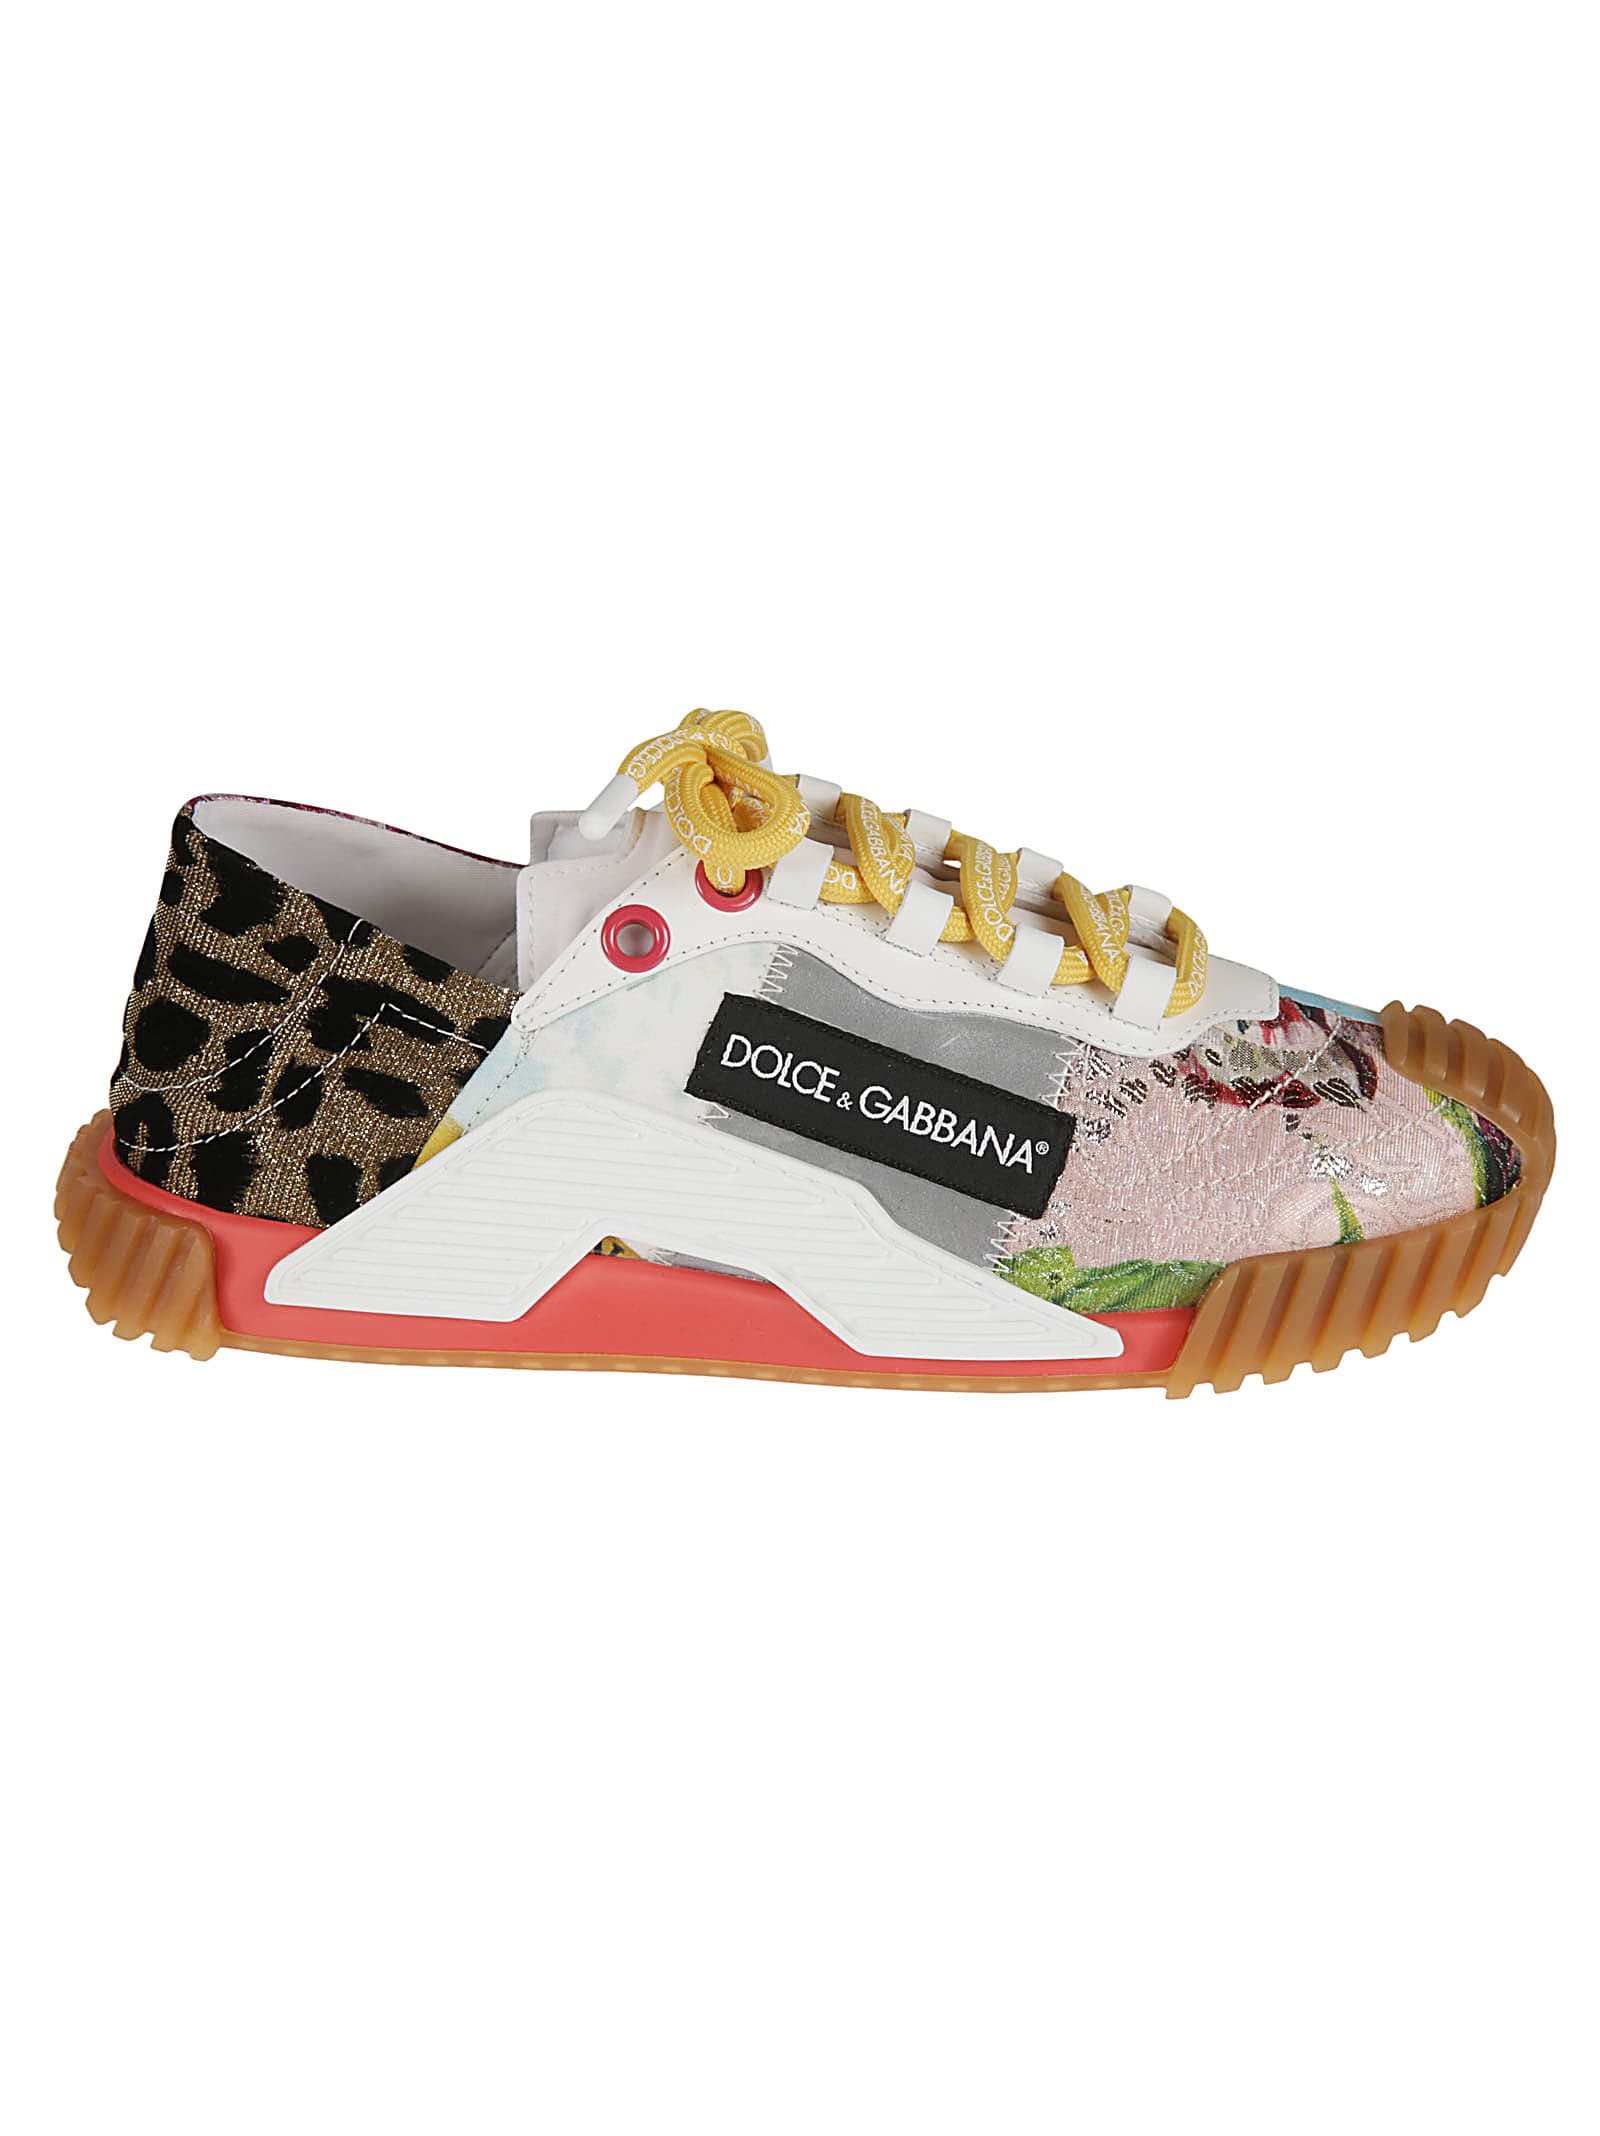 Dolce & Gabbana Logo Patched Paneled Sneakers